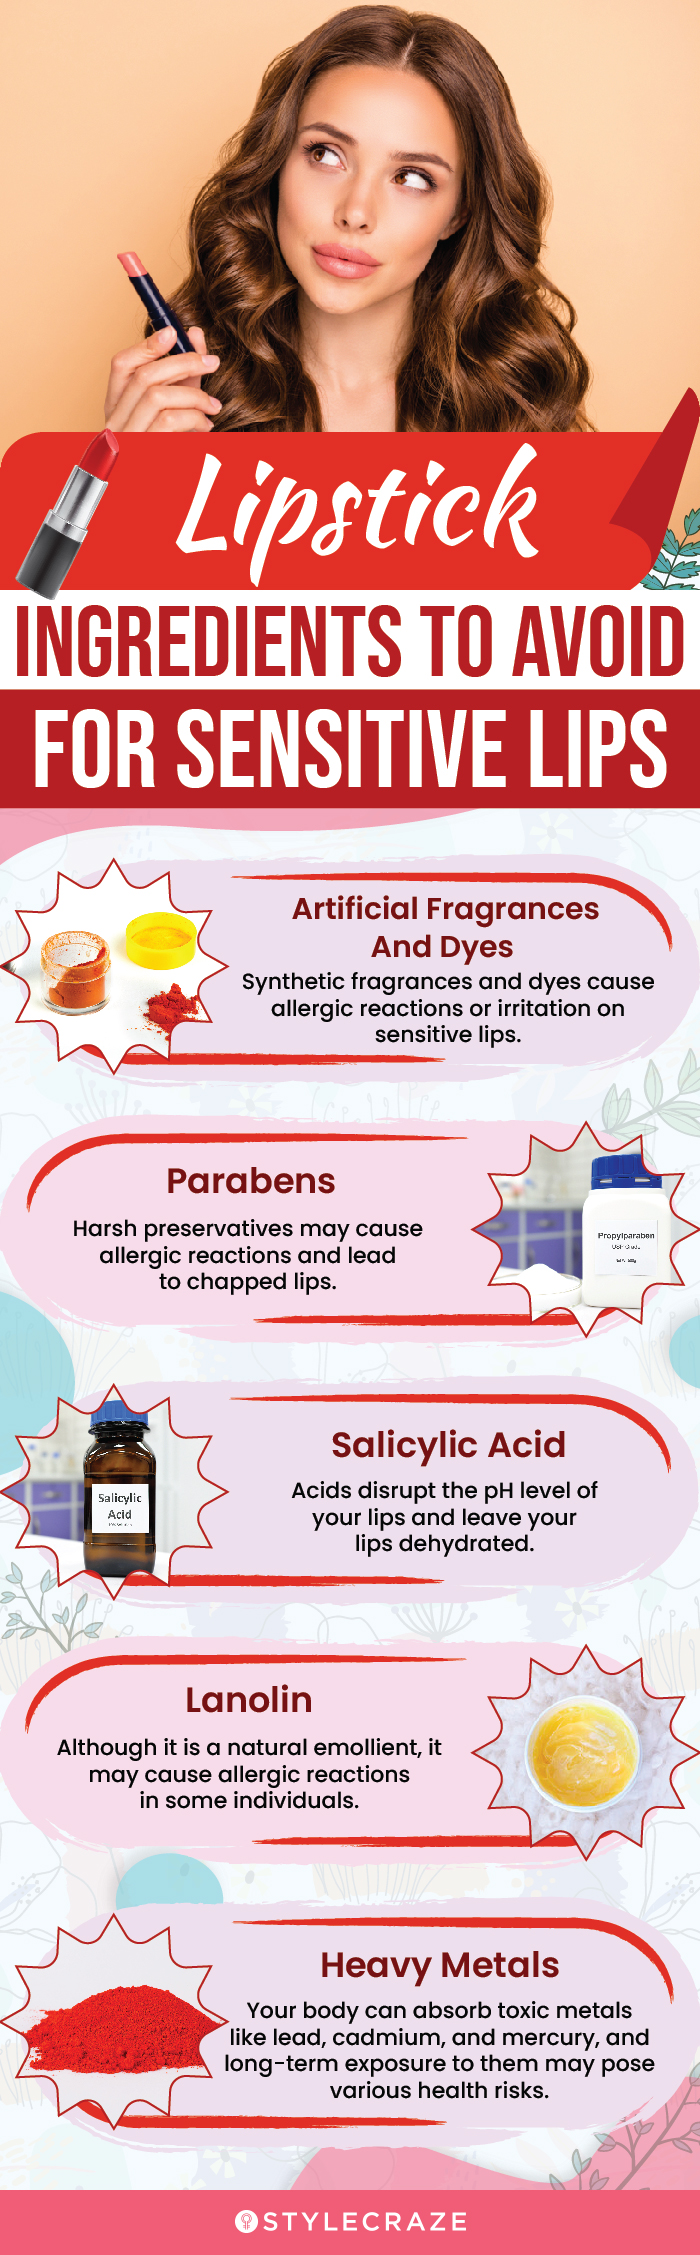 Lipstick Ingredients To Avoid For Sensitive Lips (infographic)